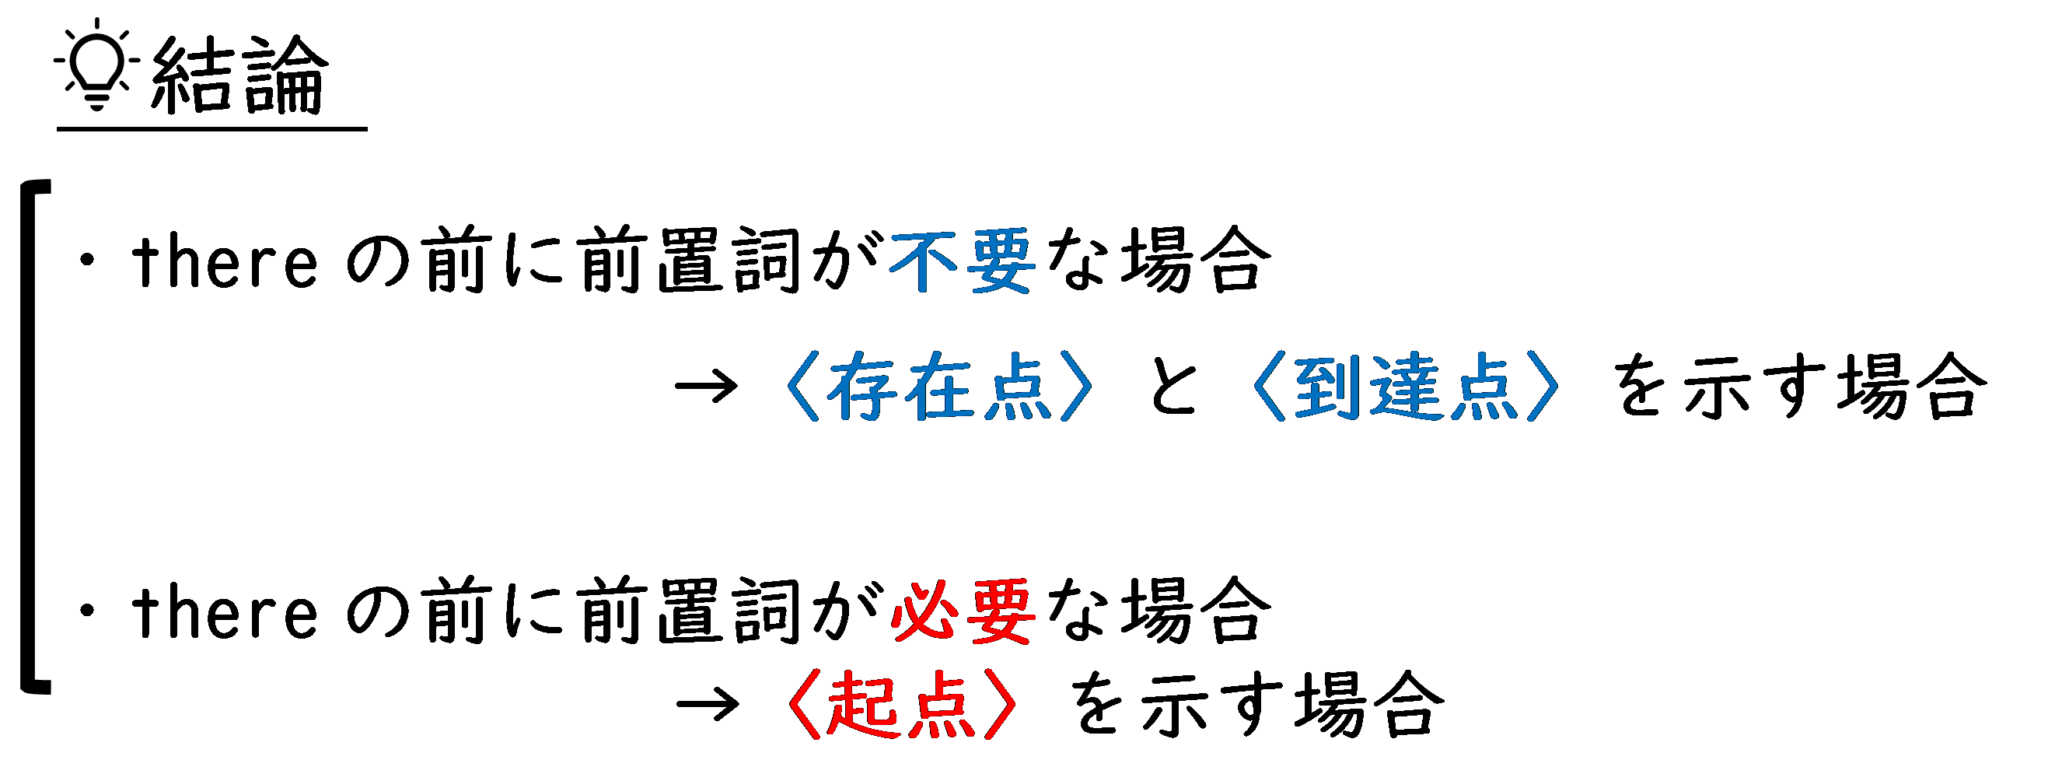 thereと前置詞　結論